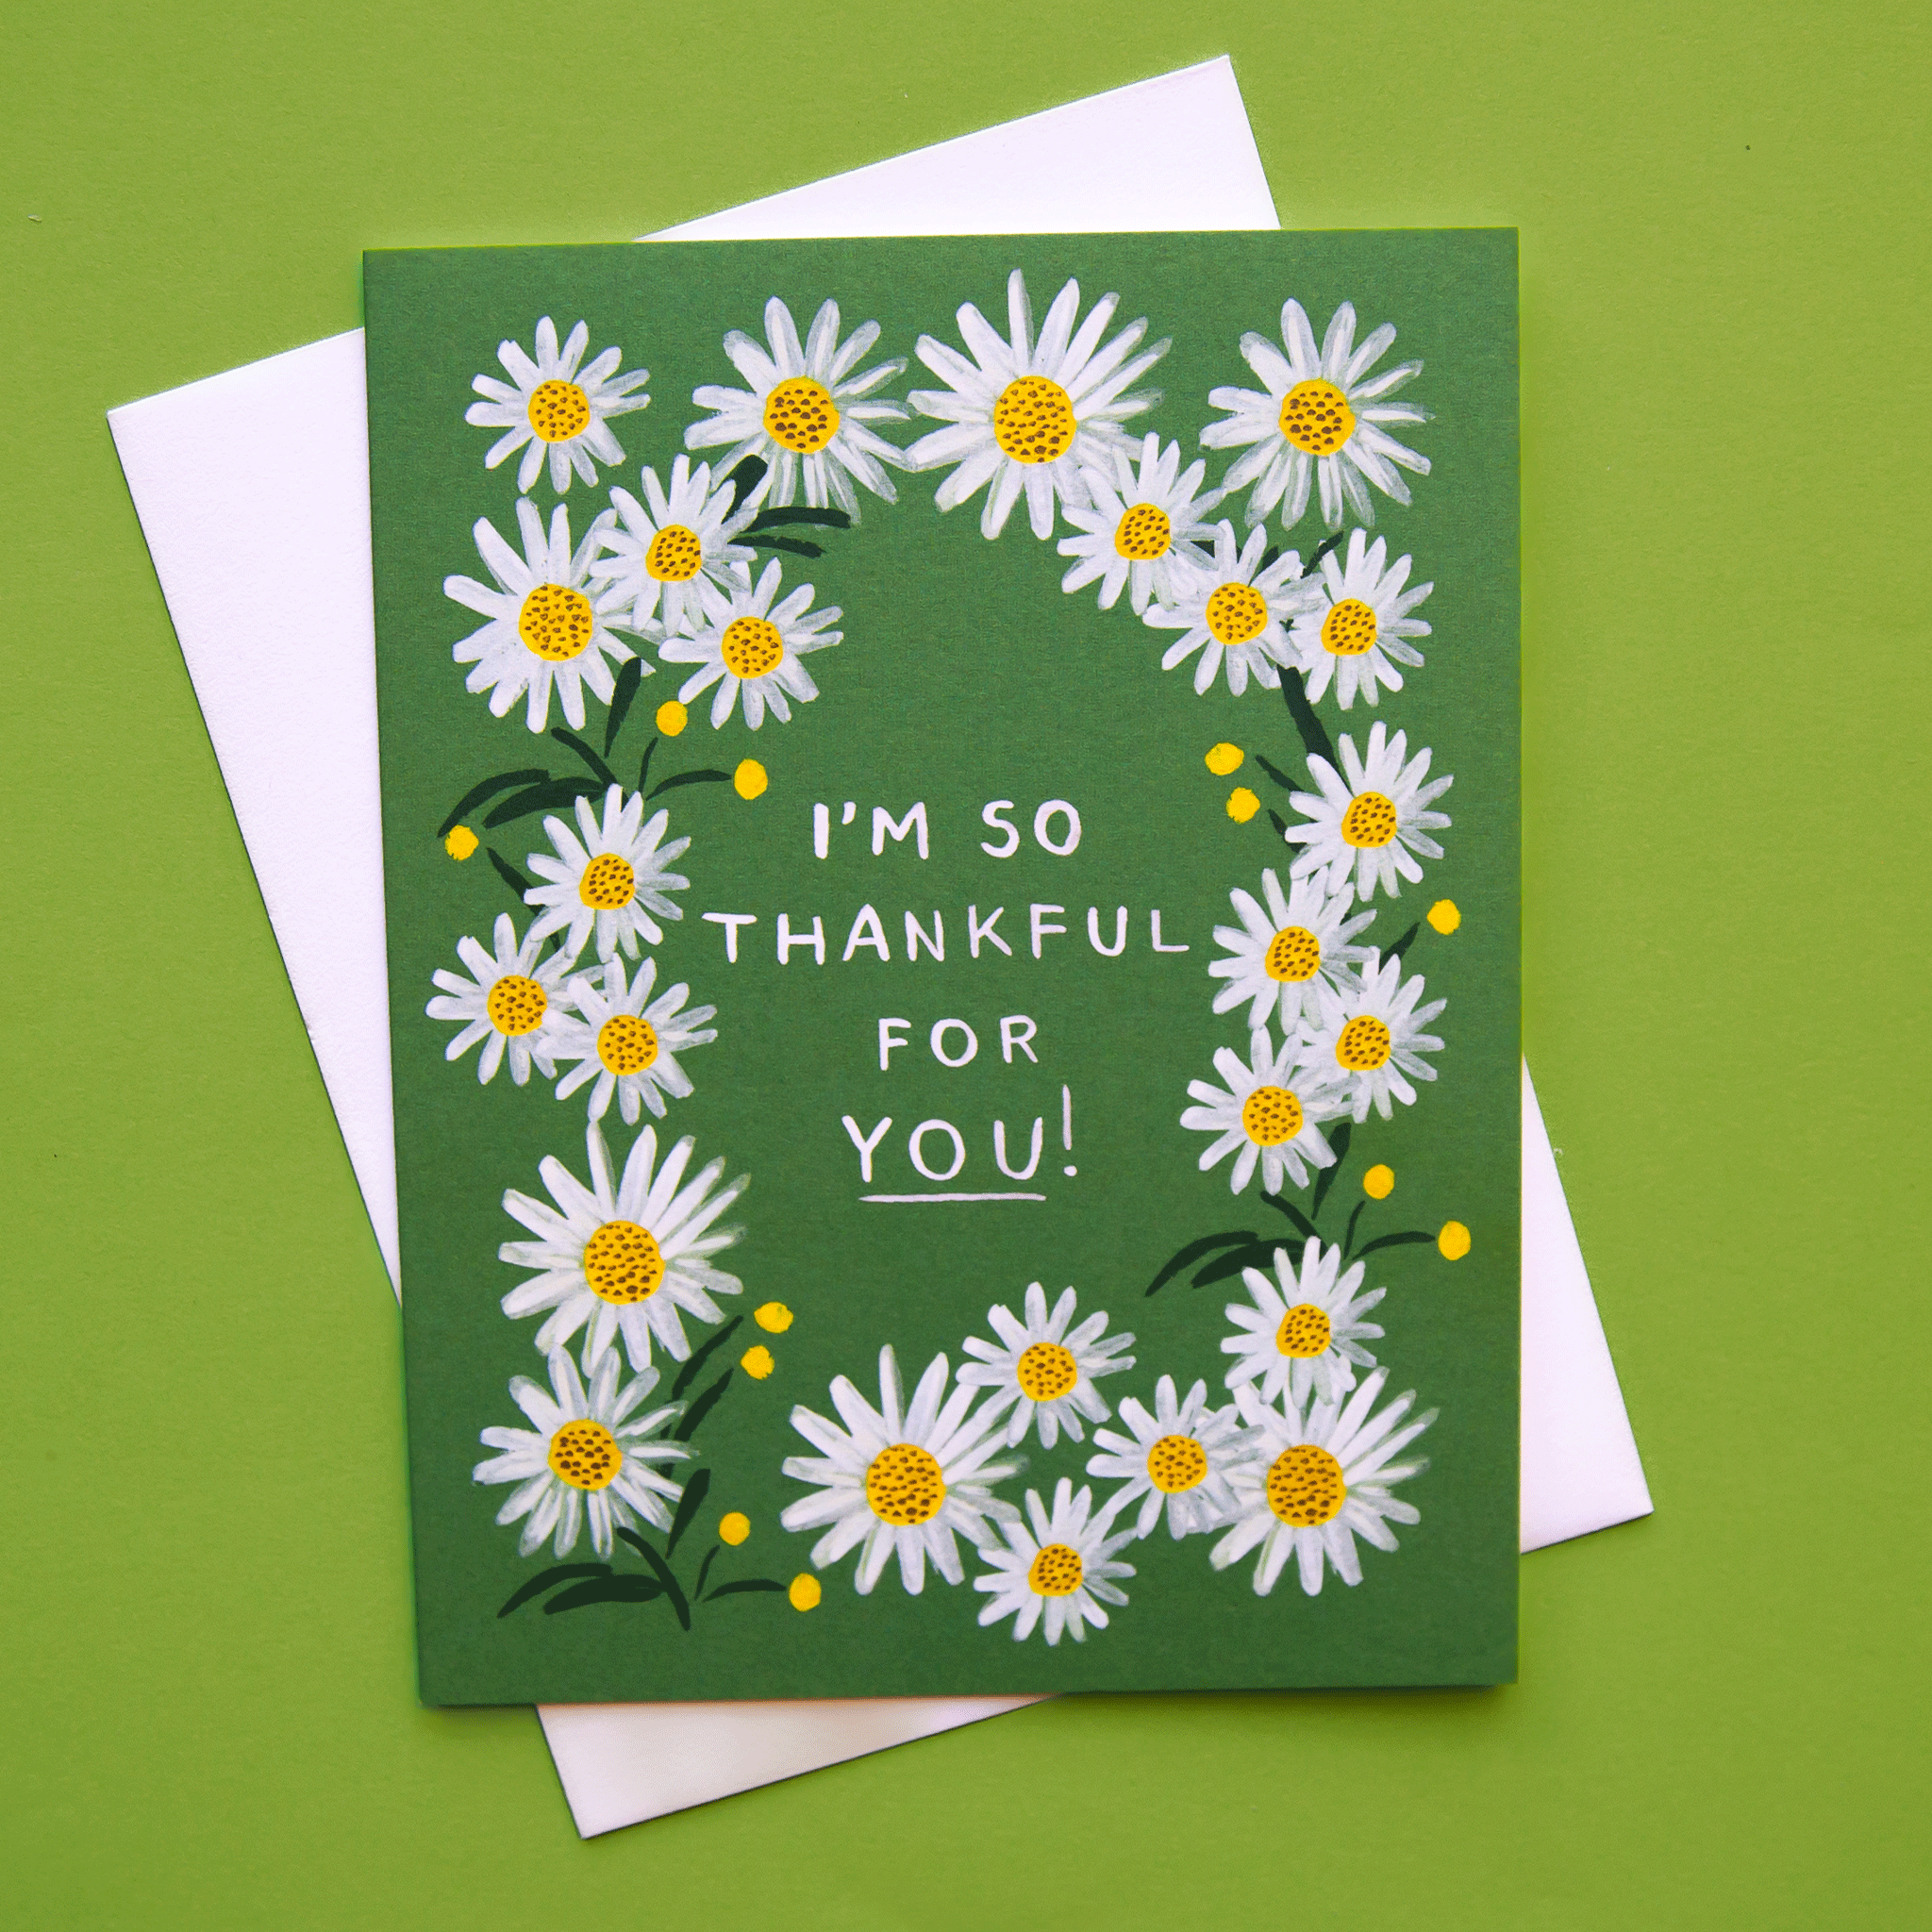 A photograph of a green card and a white envelope behind it. The card has a white daisy border around white text in the center that reads, "I'm So Thankful For You!".